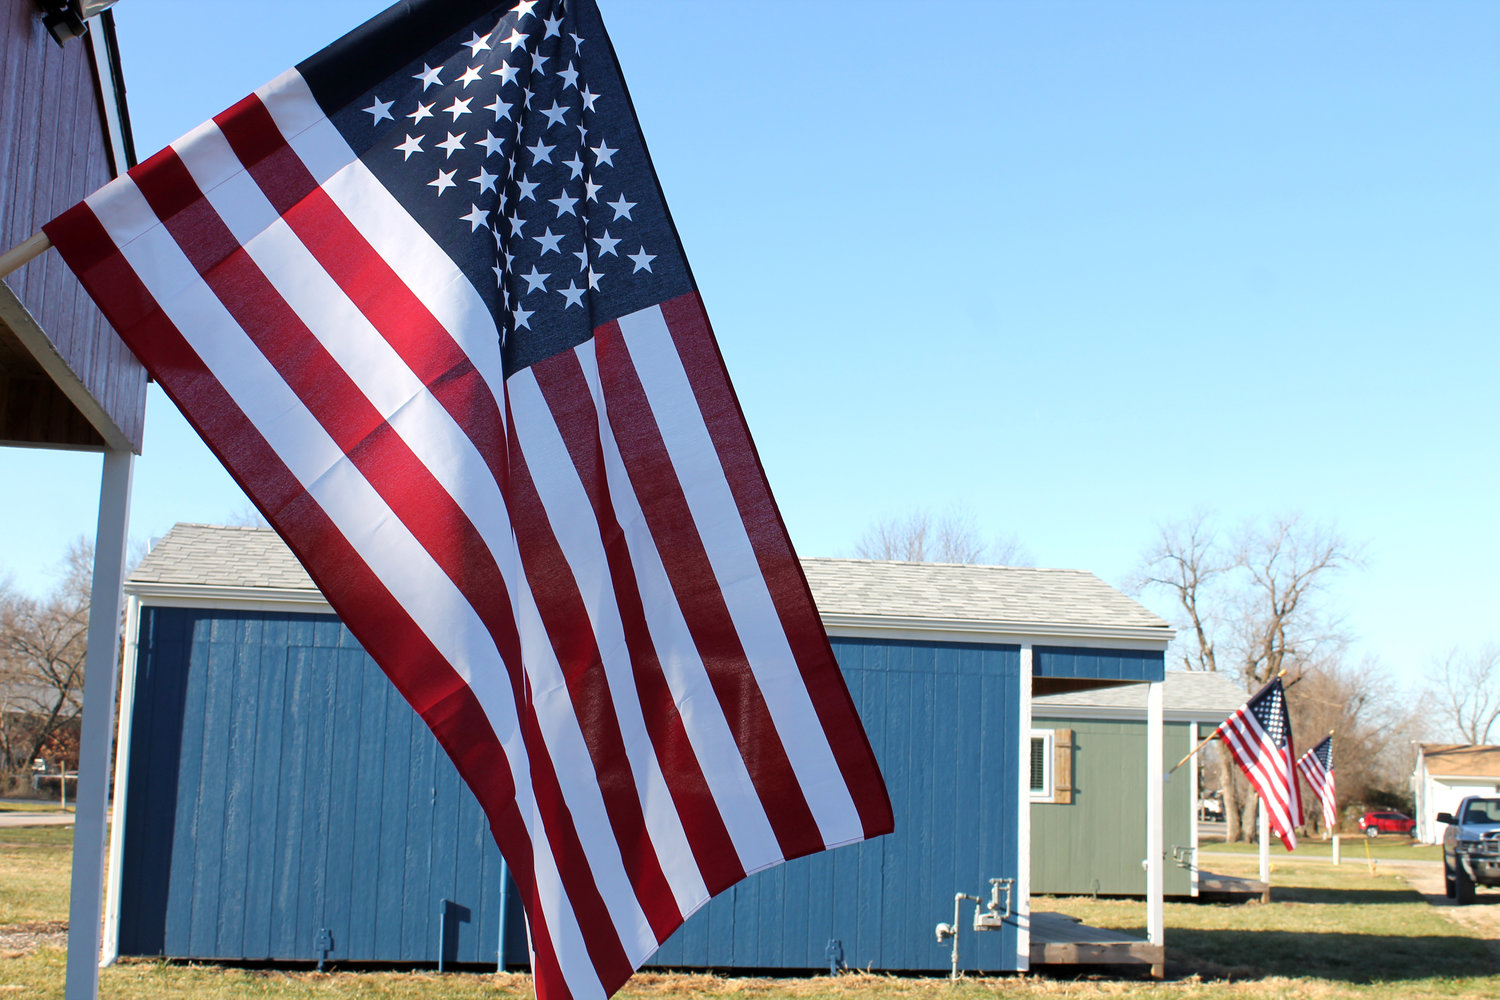 American flags wave in the crisp breeze on the tiny homes in the new Veterans Village on Wednesday morning.